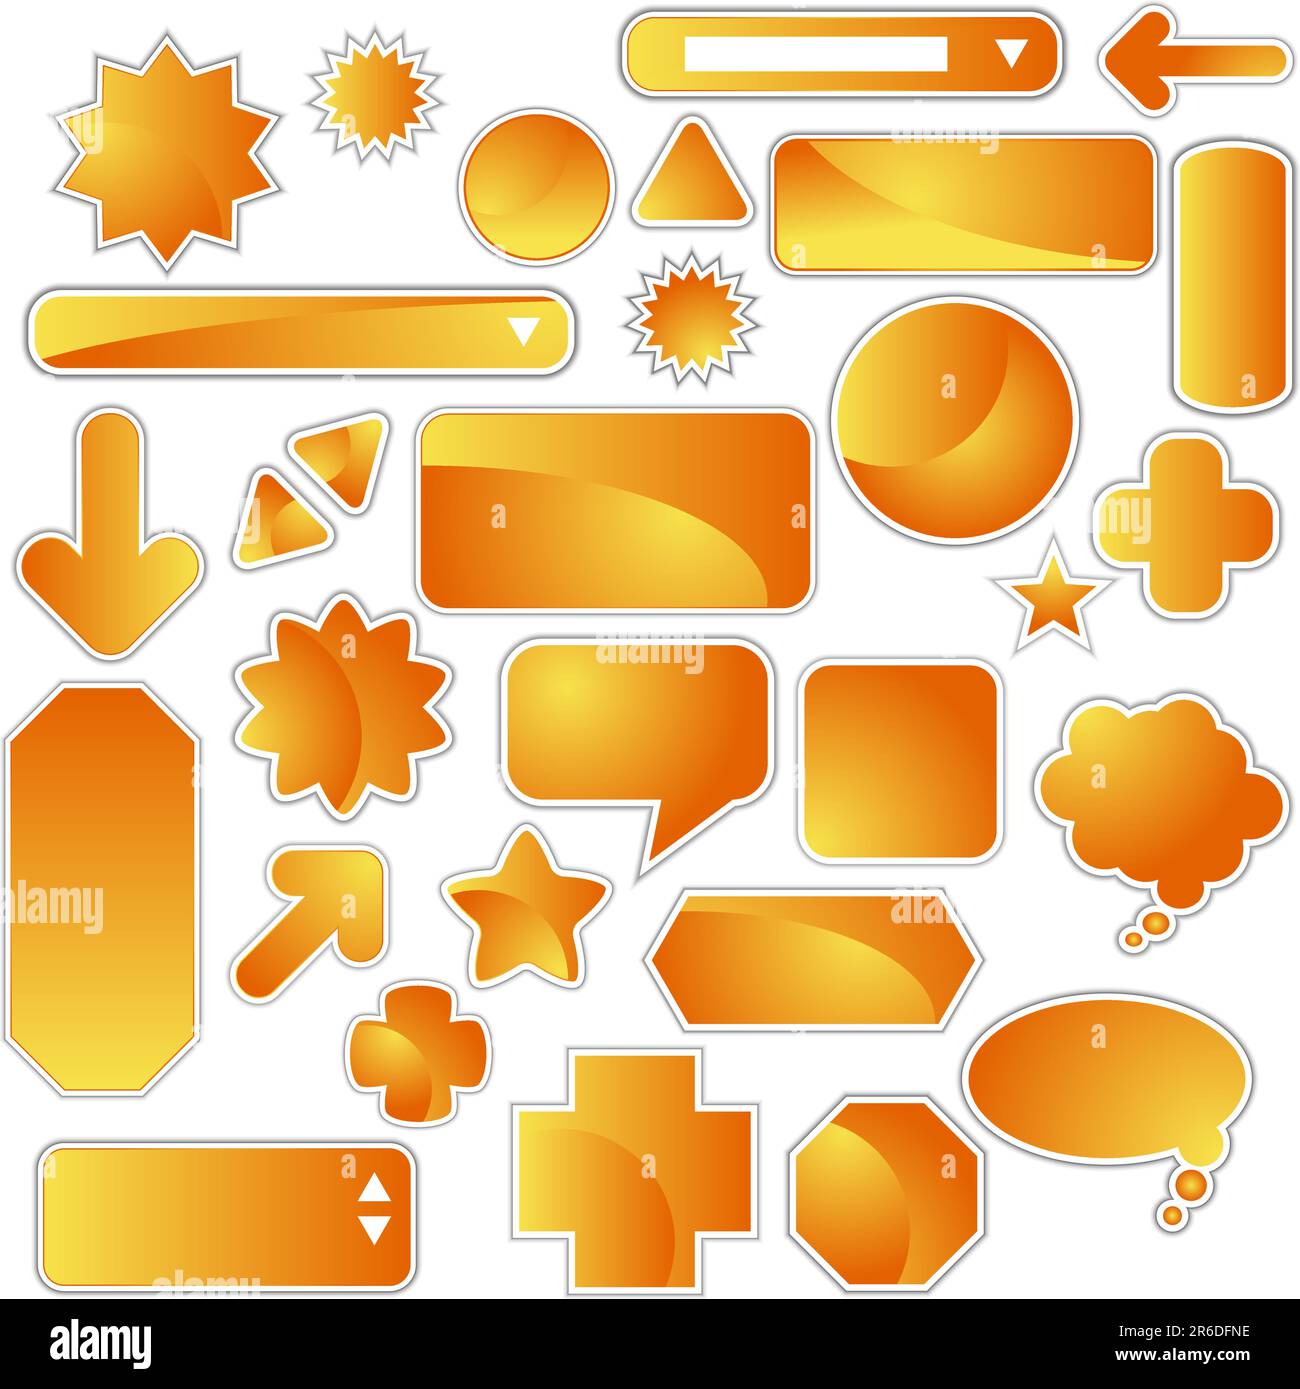 Set of multiple web labels and icons - orange color. Stock Vector